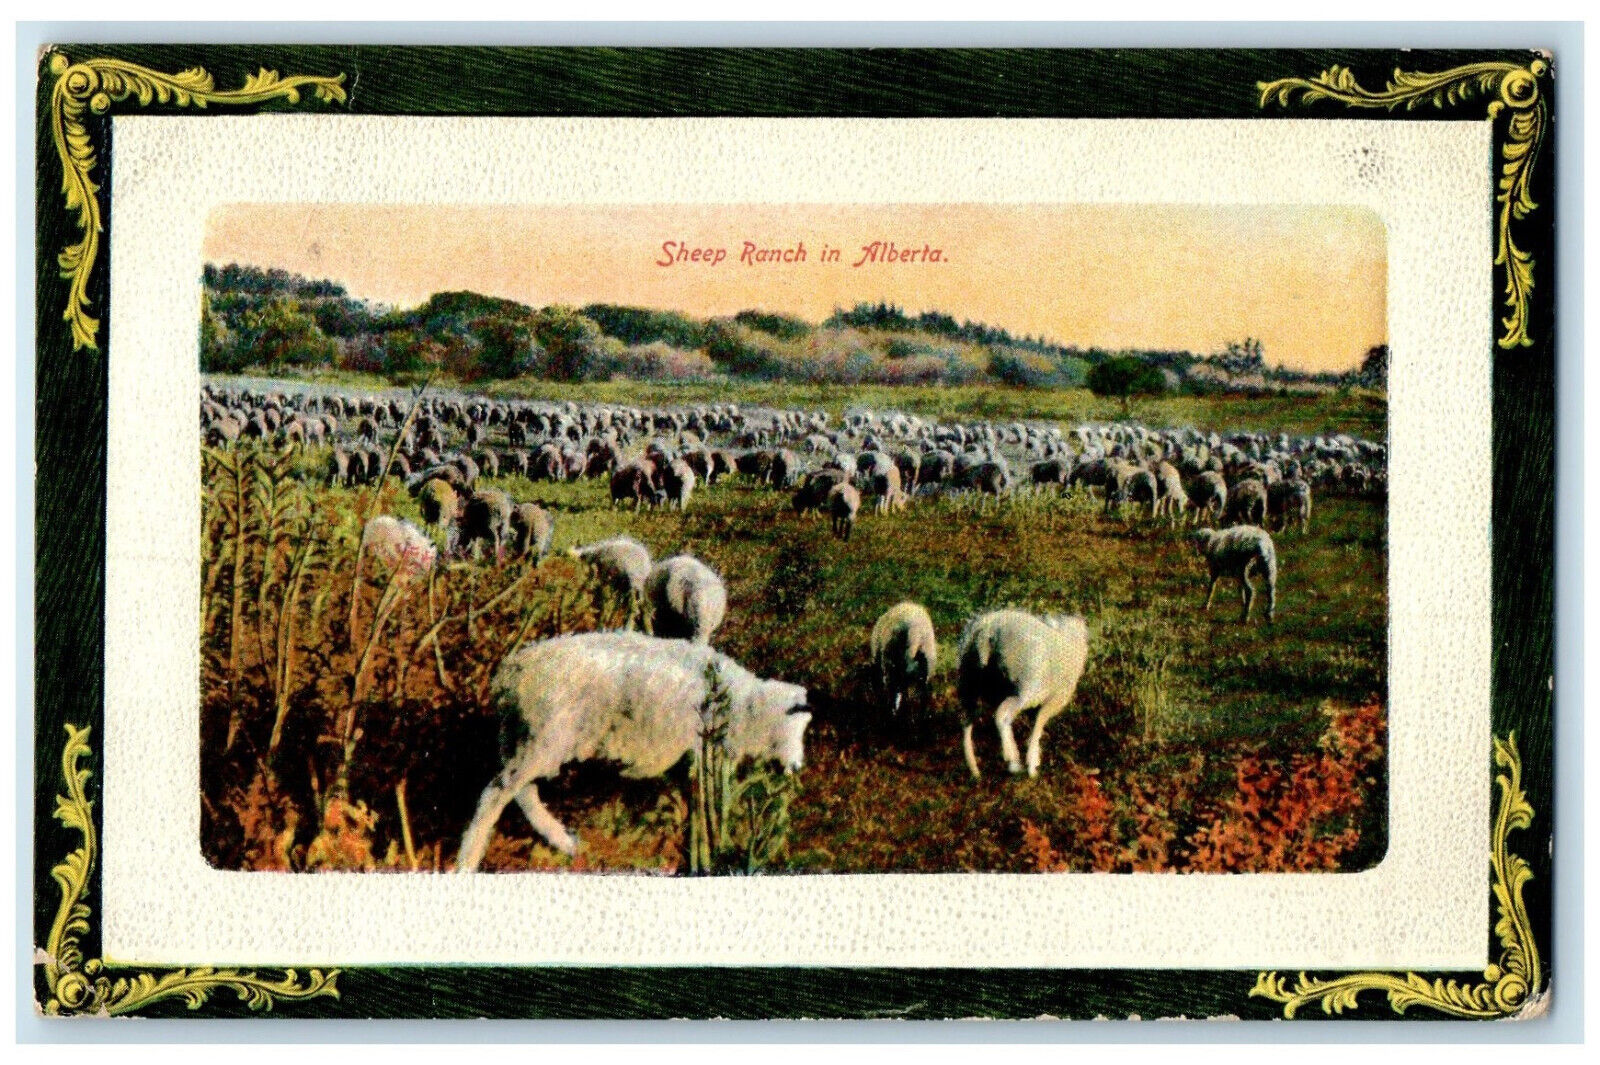 c1910 Scene of Sheep in Ranch in Alberta Canada Antique Posted Postcard